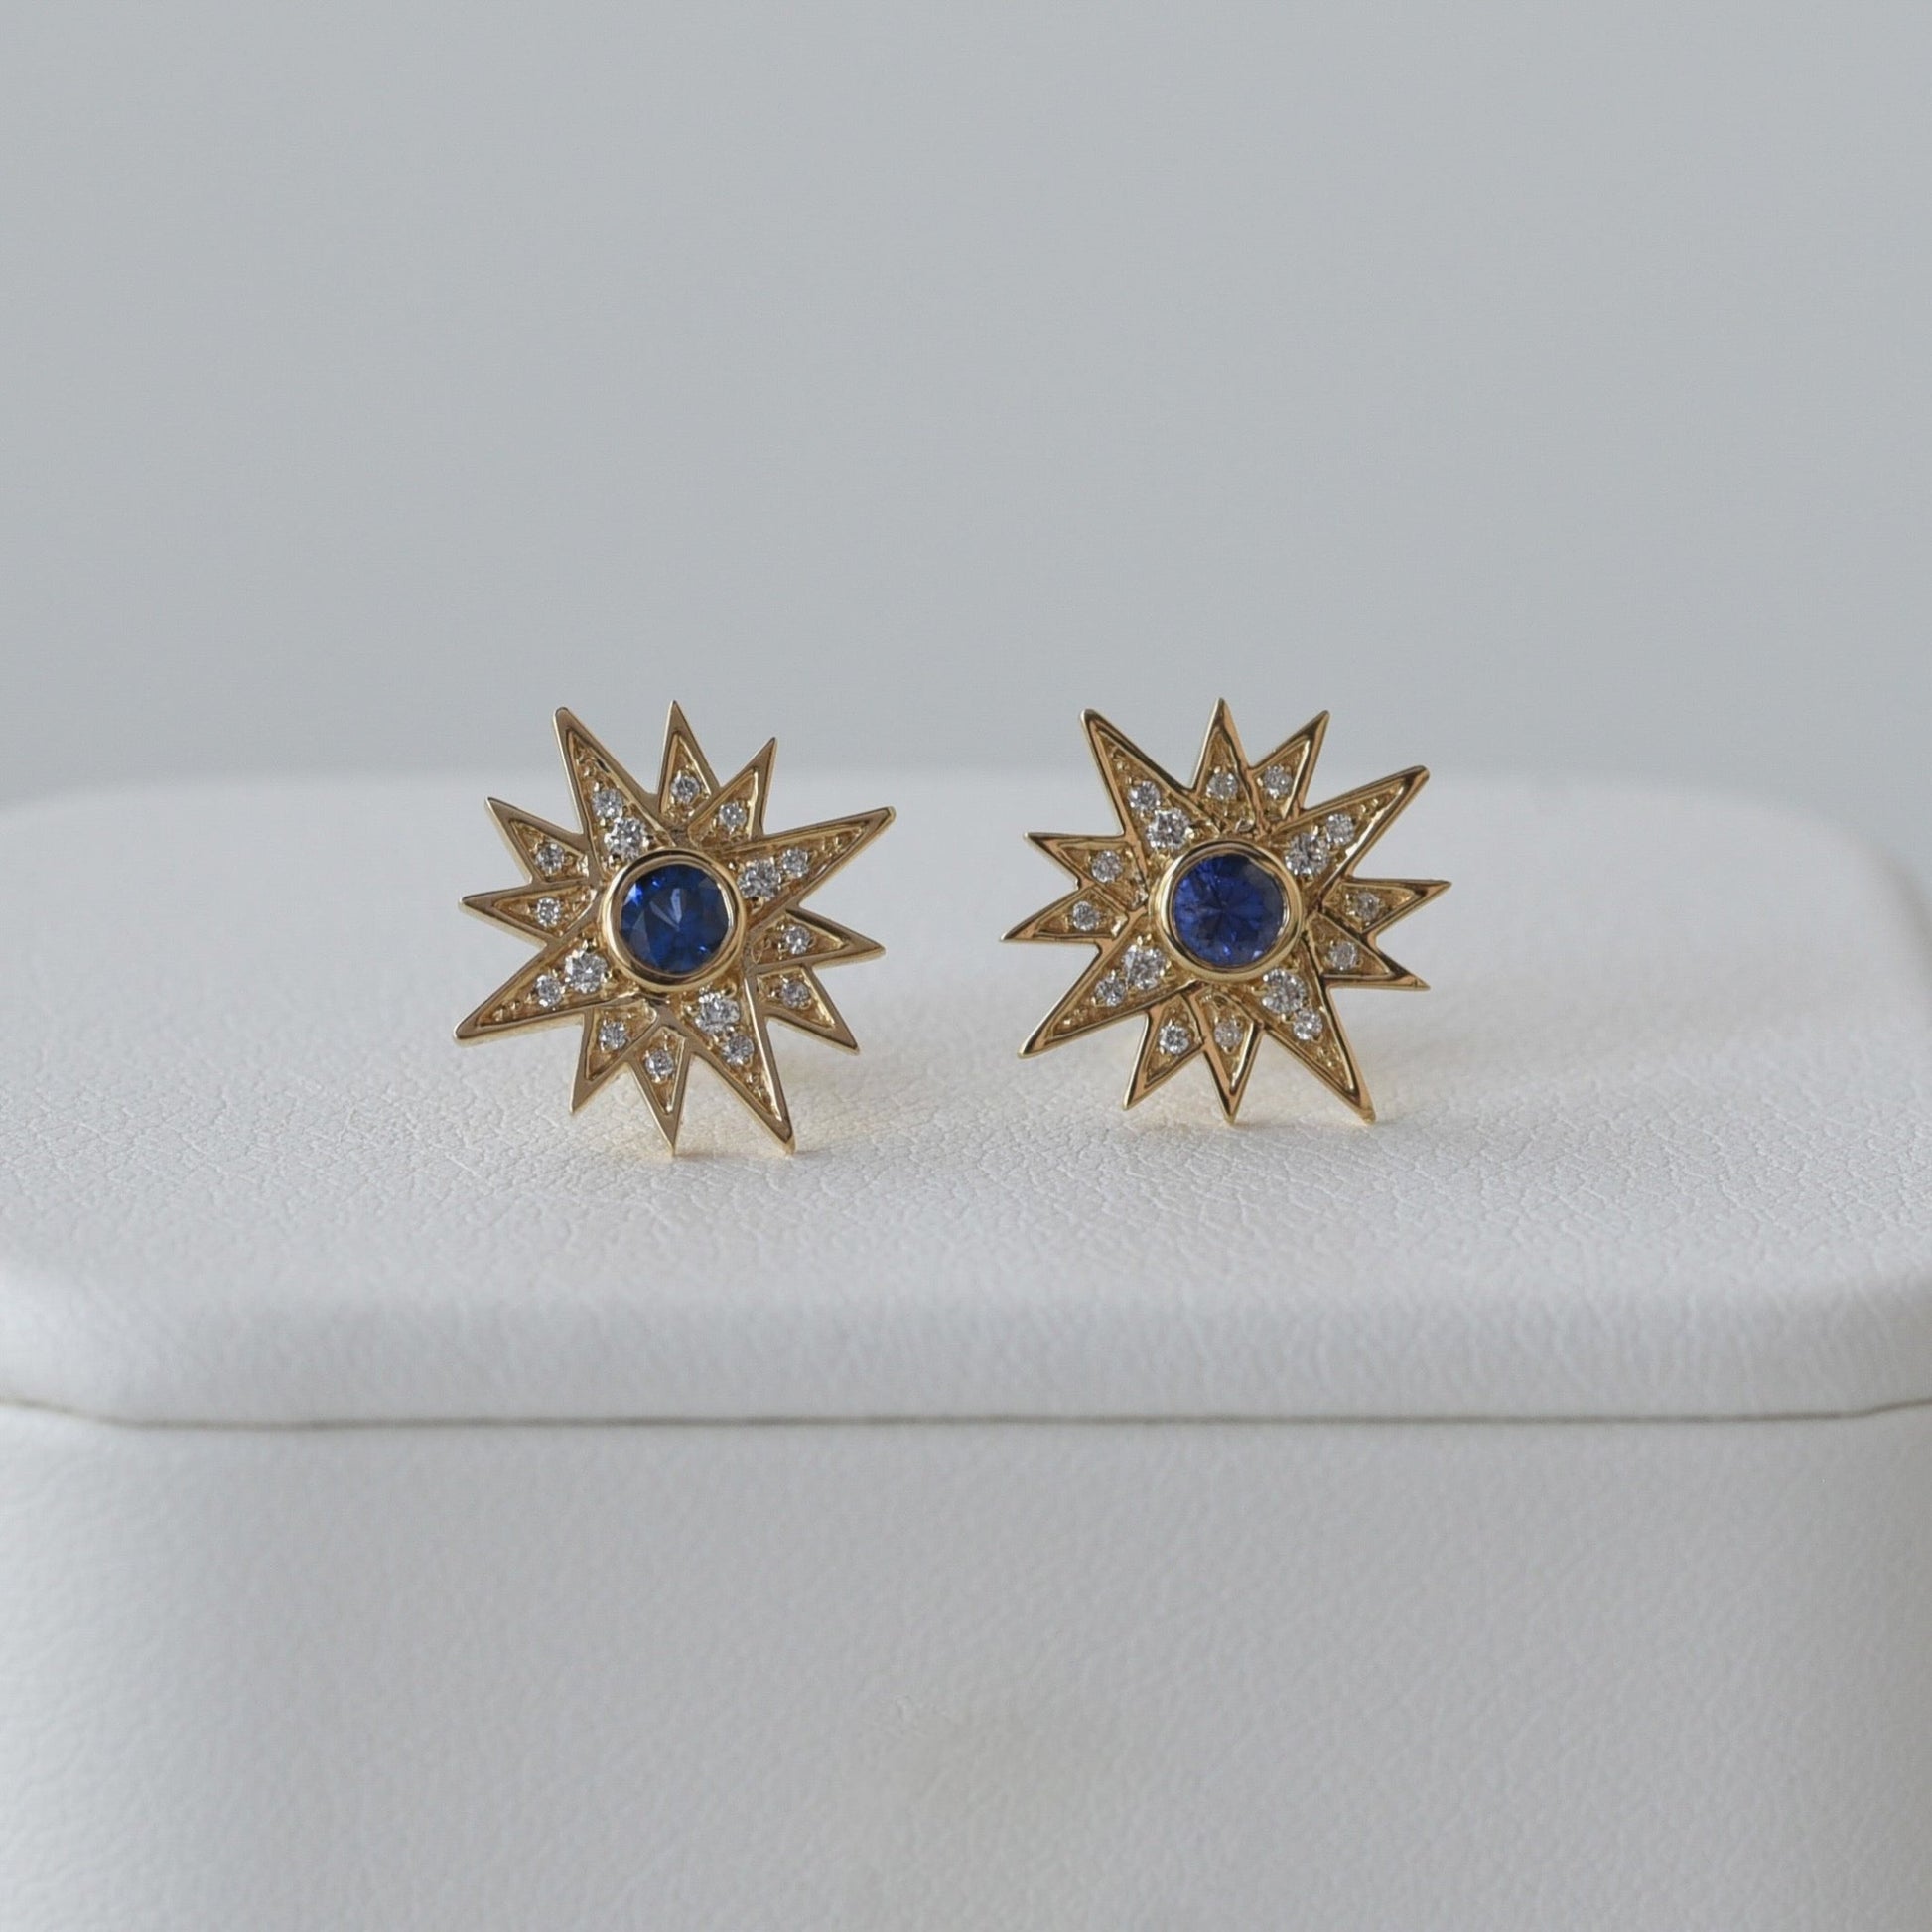 Liora Earrings in Diamond and Sapphire - 18k Gold - Lynor